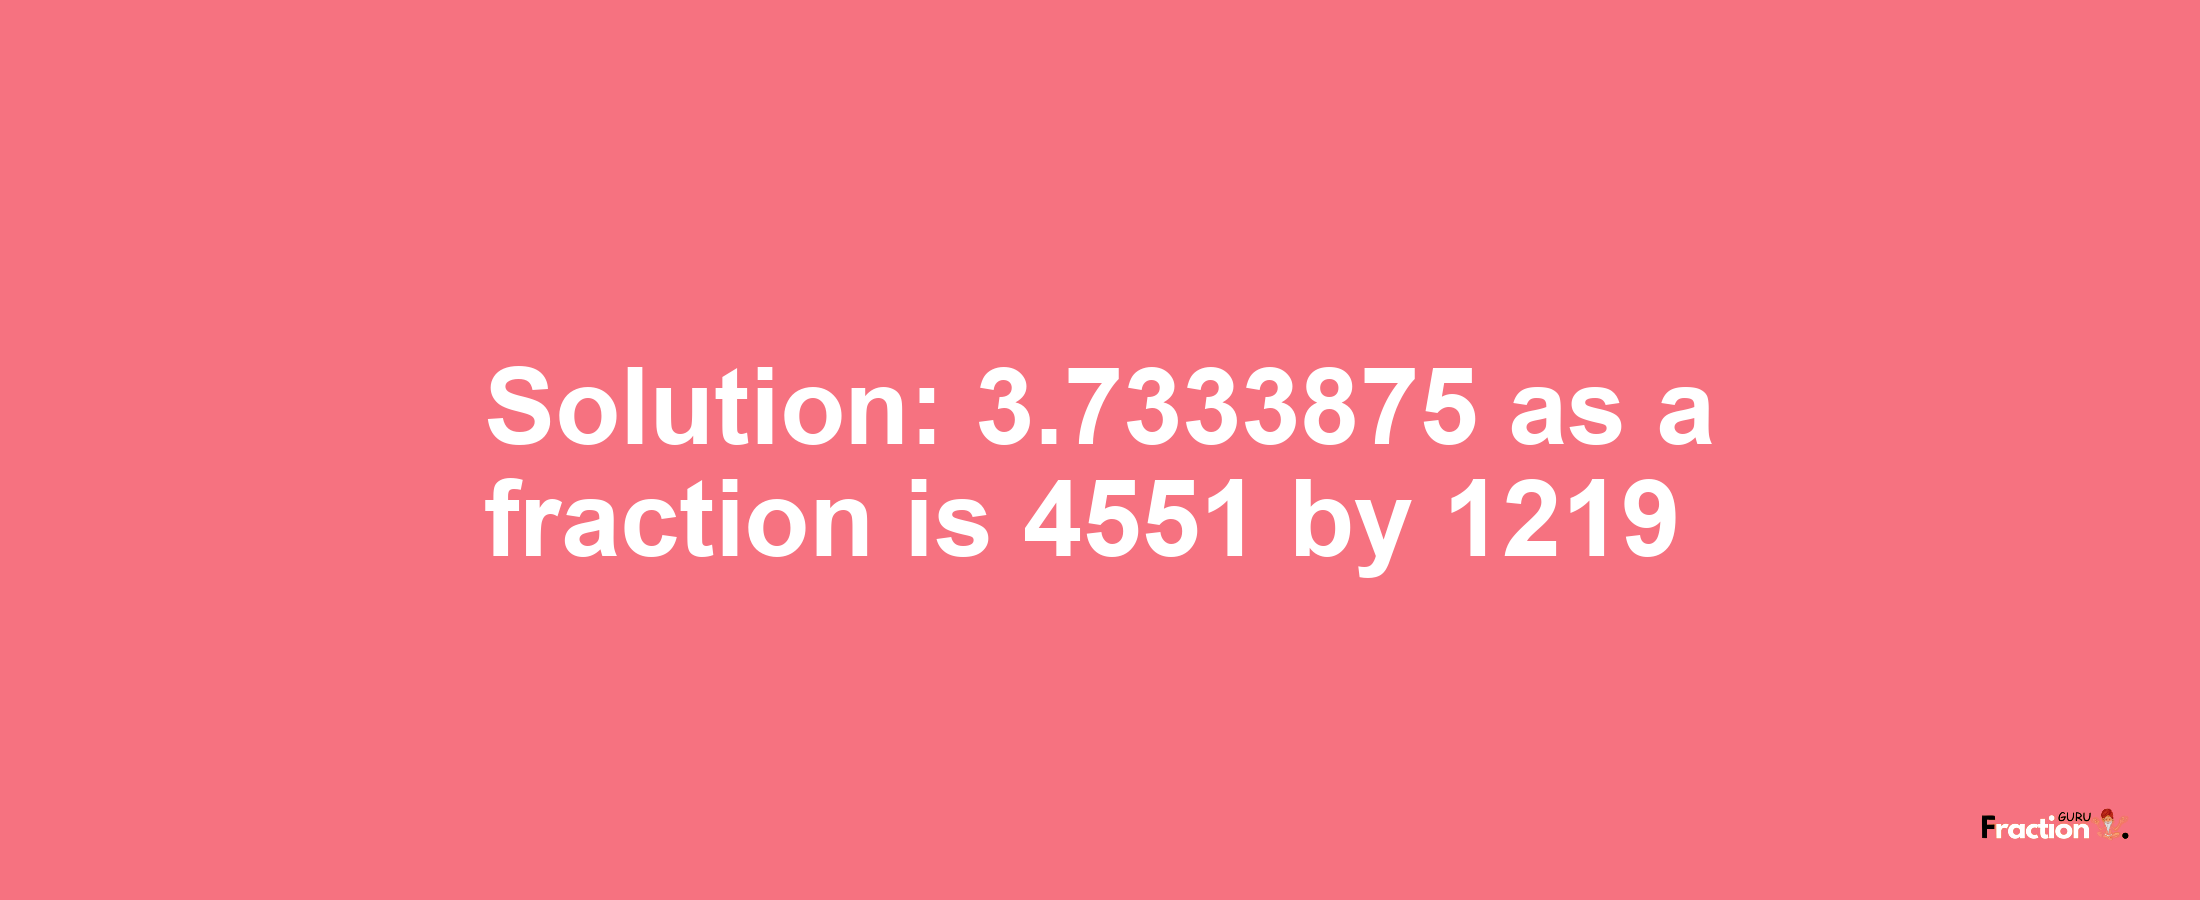 Solution:3.7333875 as a fraction is 4551/1219